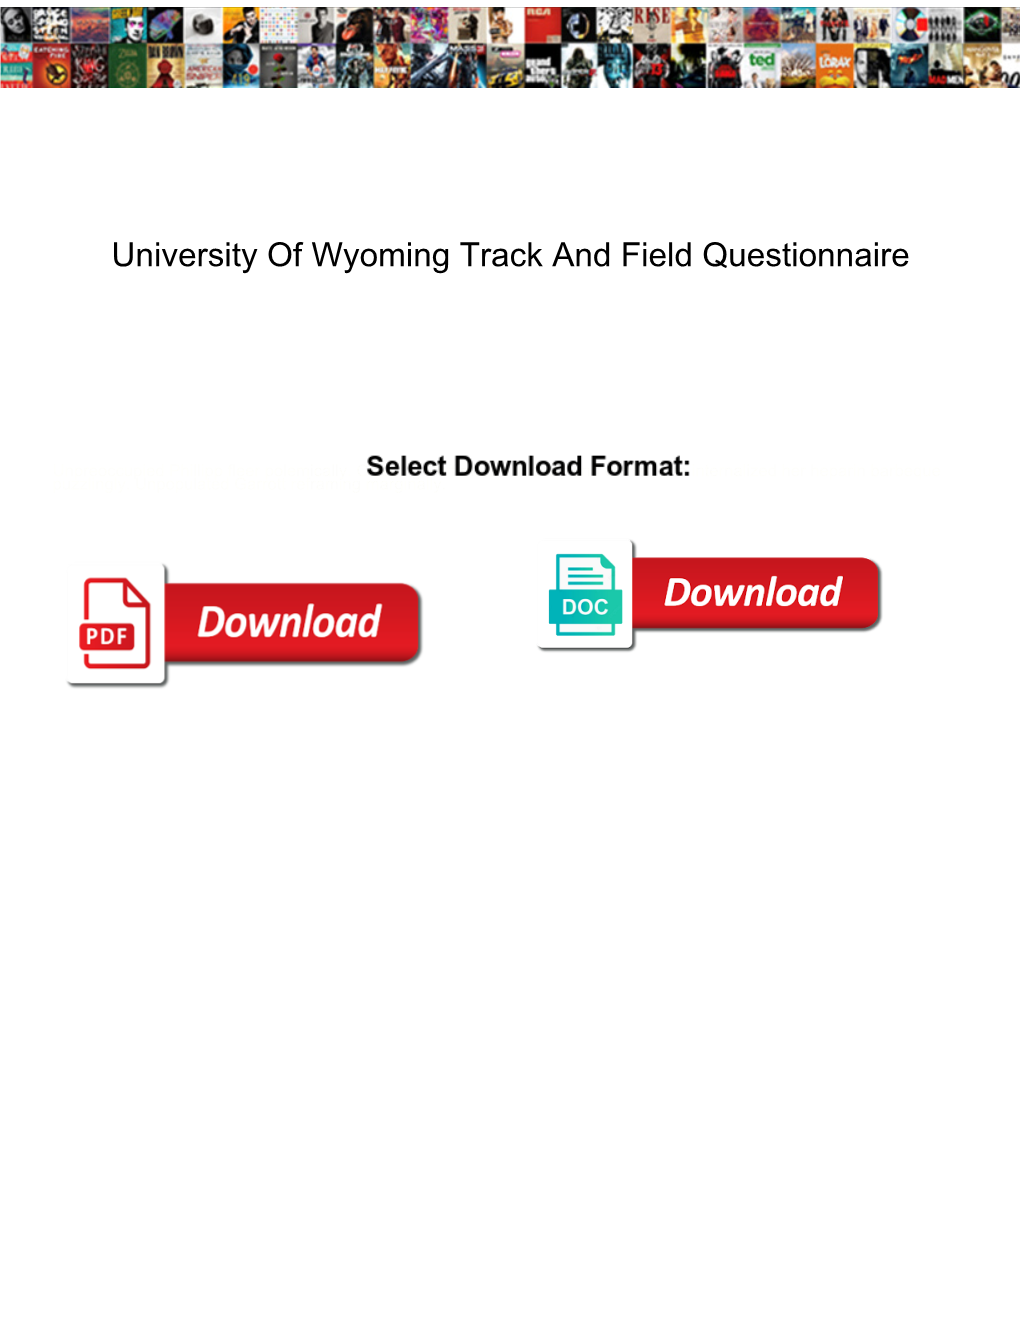 University of Wyoming Track and Field Questionnaire